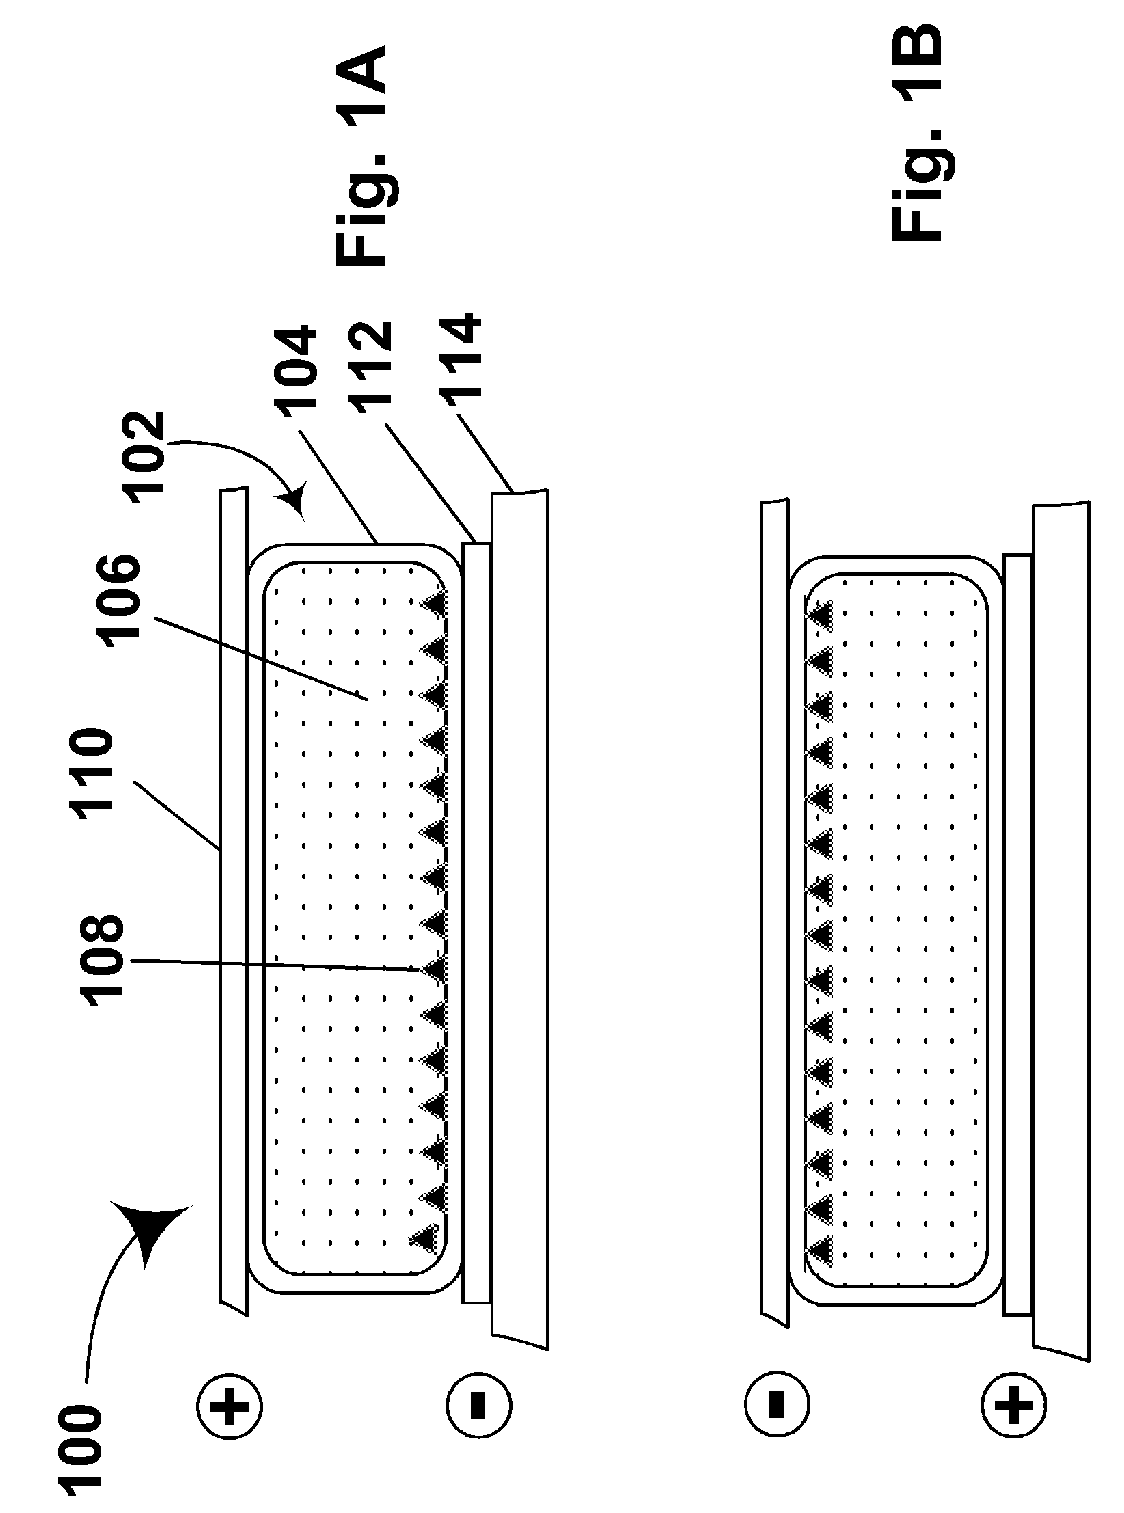 Electrophoretic media and processes for the production thereof